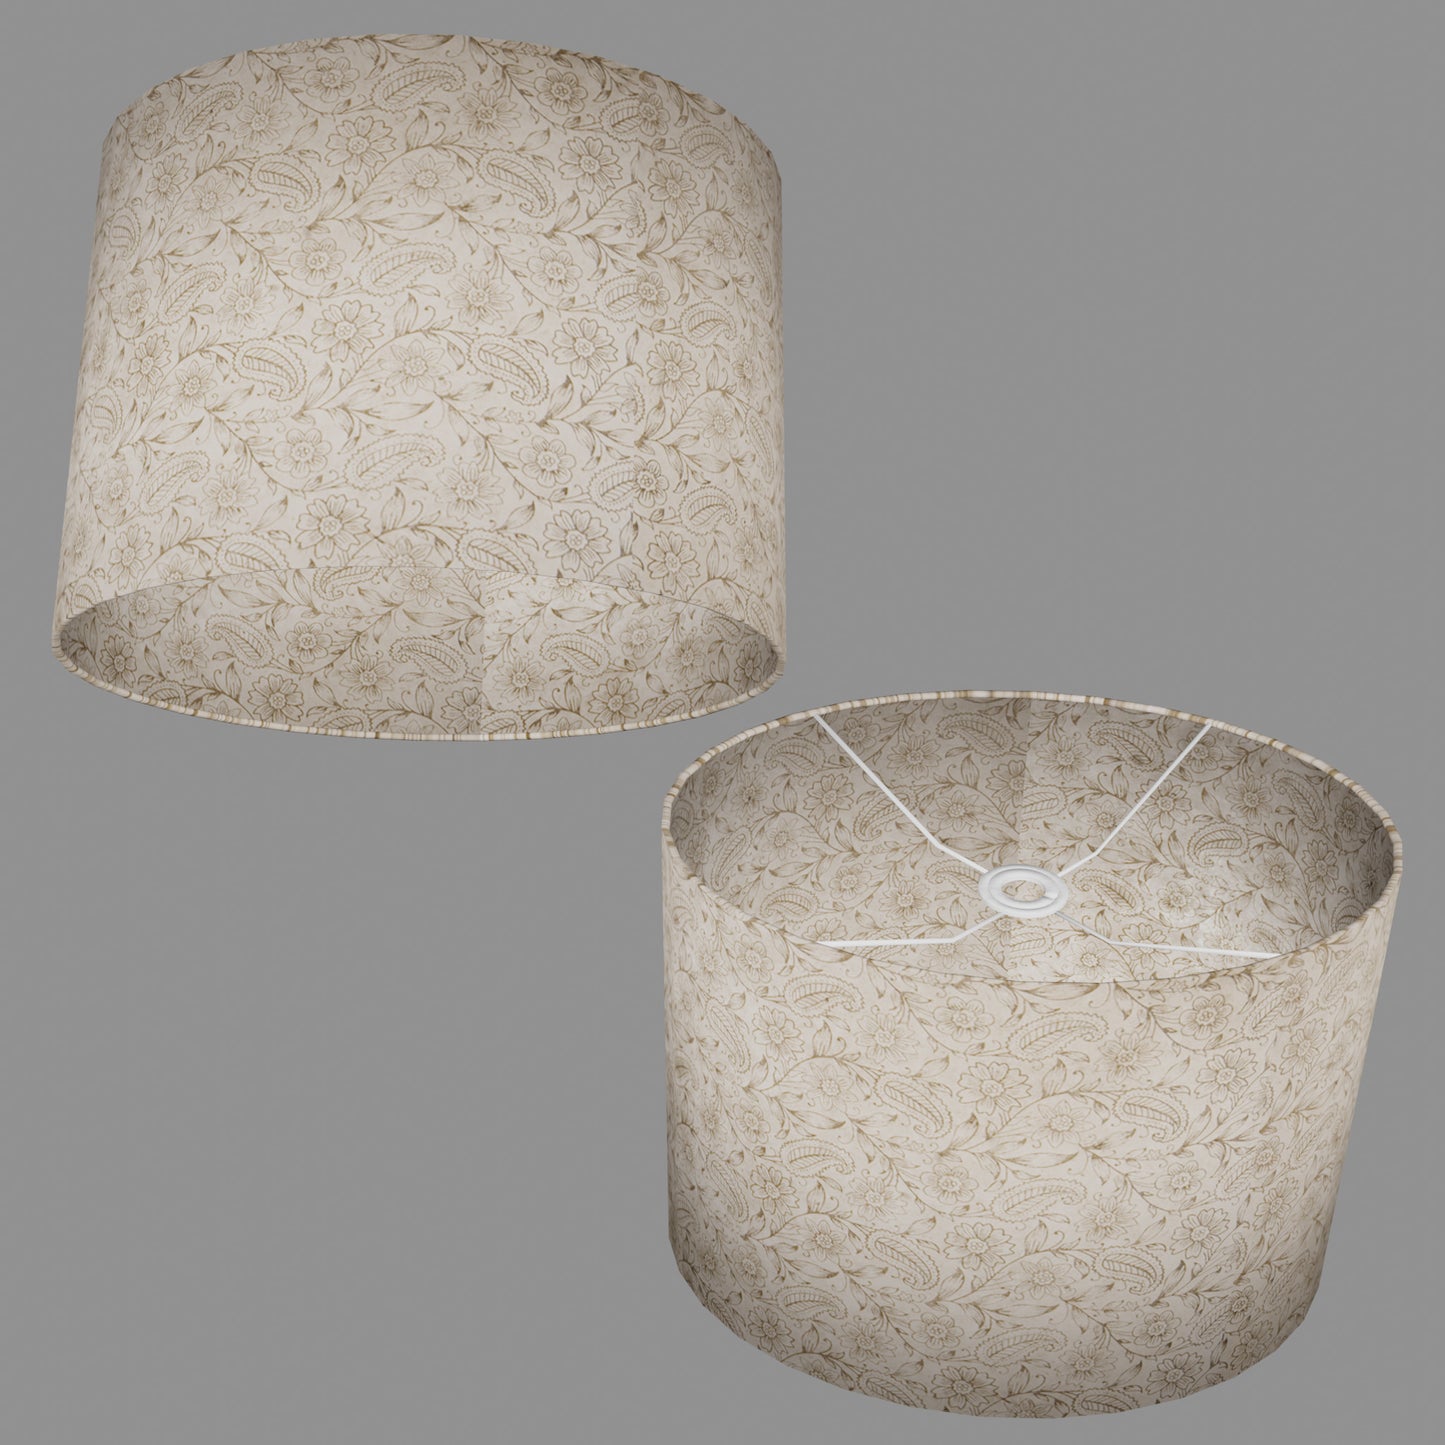 Oval Lamp Shade - P69 - Garden Gold on Natural, 40cm(w) x 30cm(h) x 30cm(d)